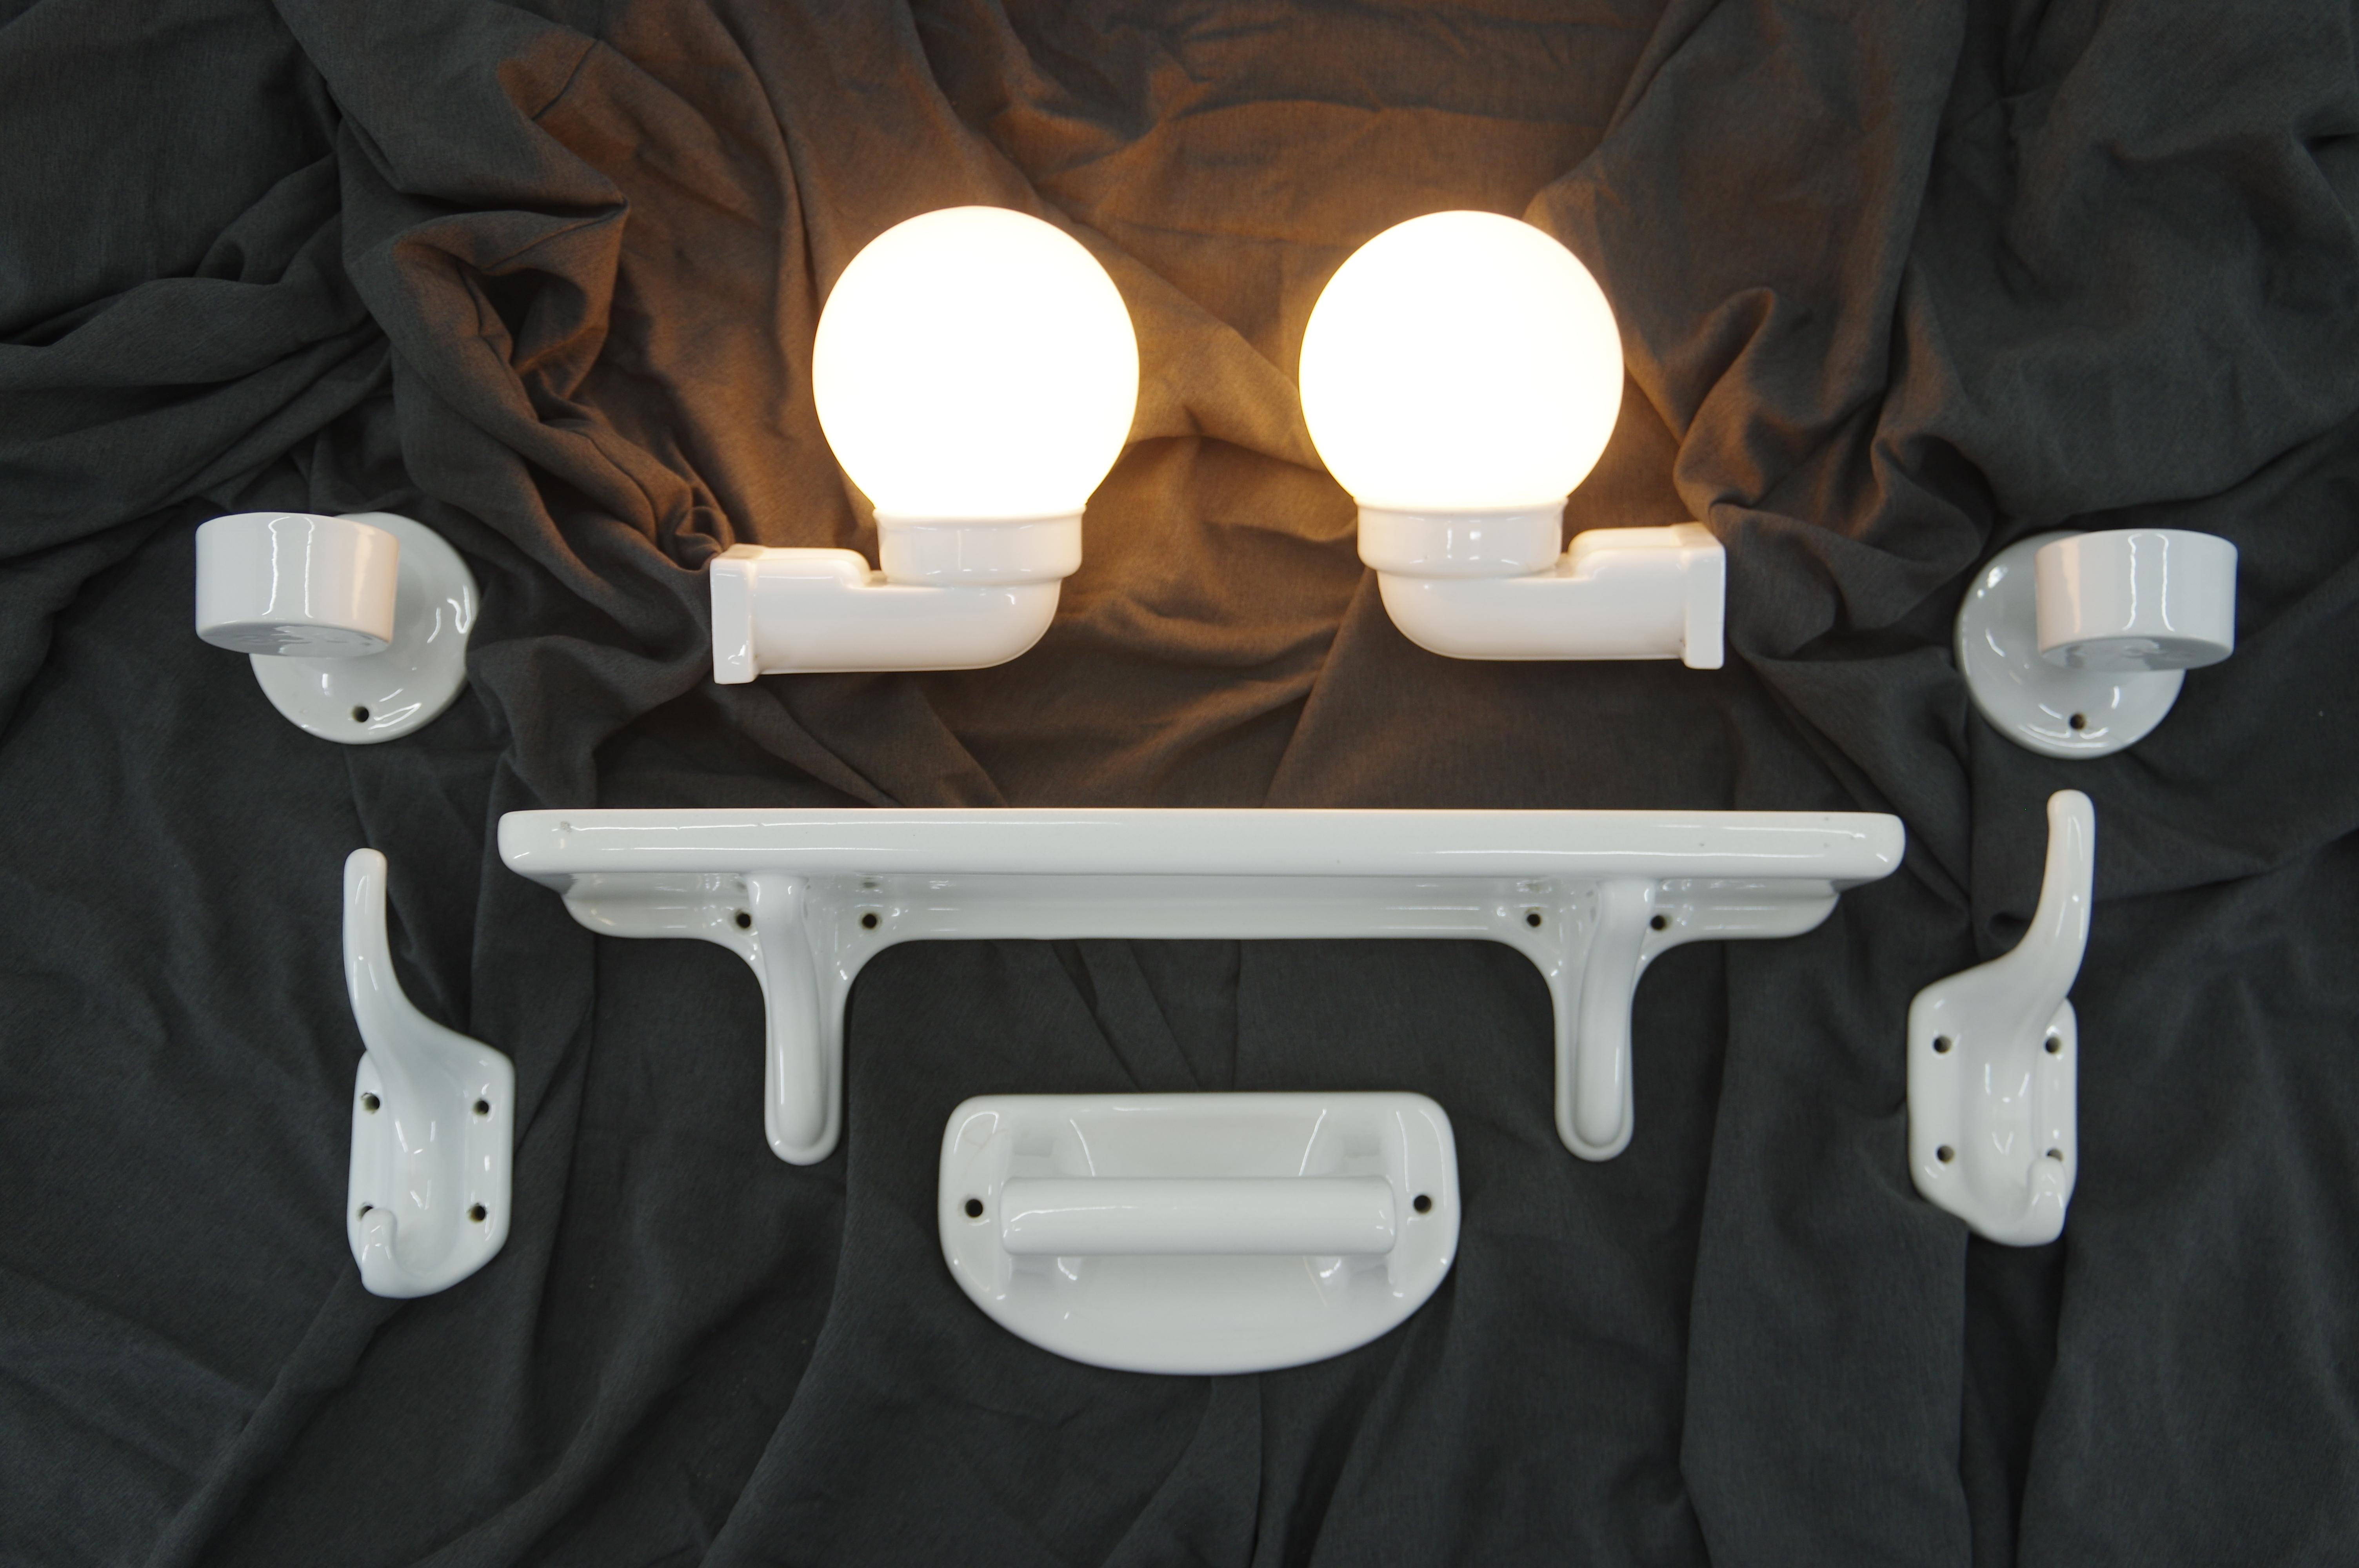 Set of Art Deco or Bauhaus bathroom accesories by Ditmar Urbach from late 1920s. Two wall lamps (E27 or E26 socket), one shelf, two hooks, two toothbrush holders and one bath wall holder. Very good condition, only one crack on toothbrush holder was